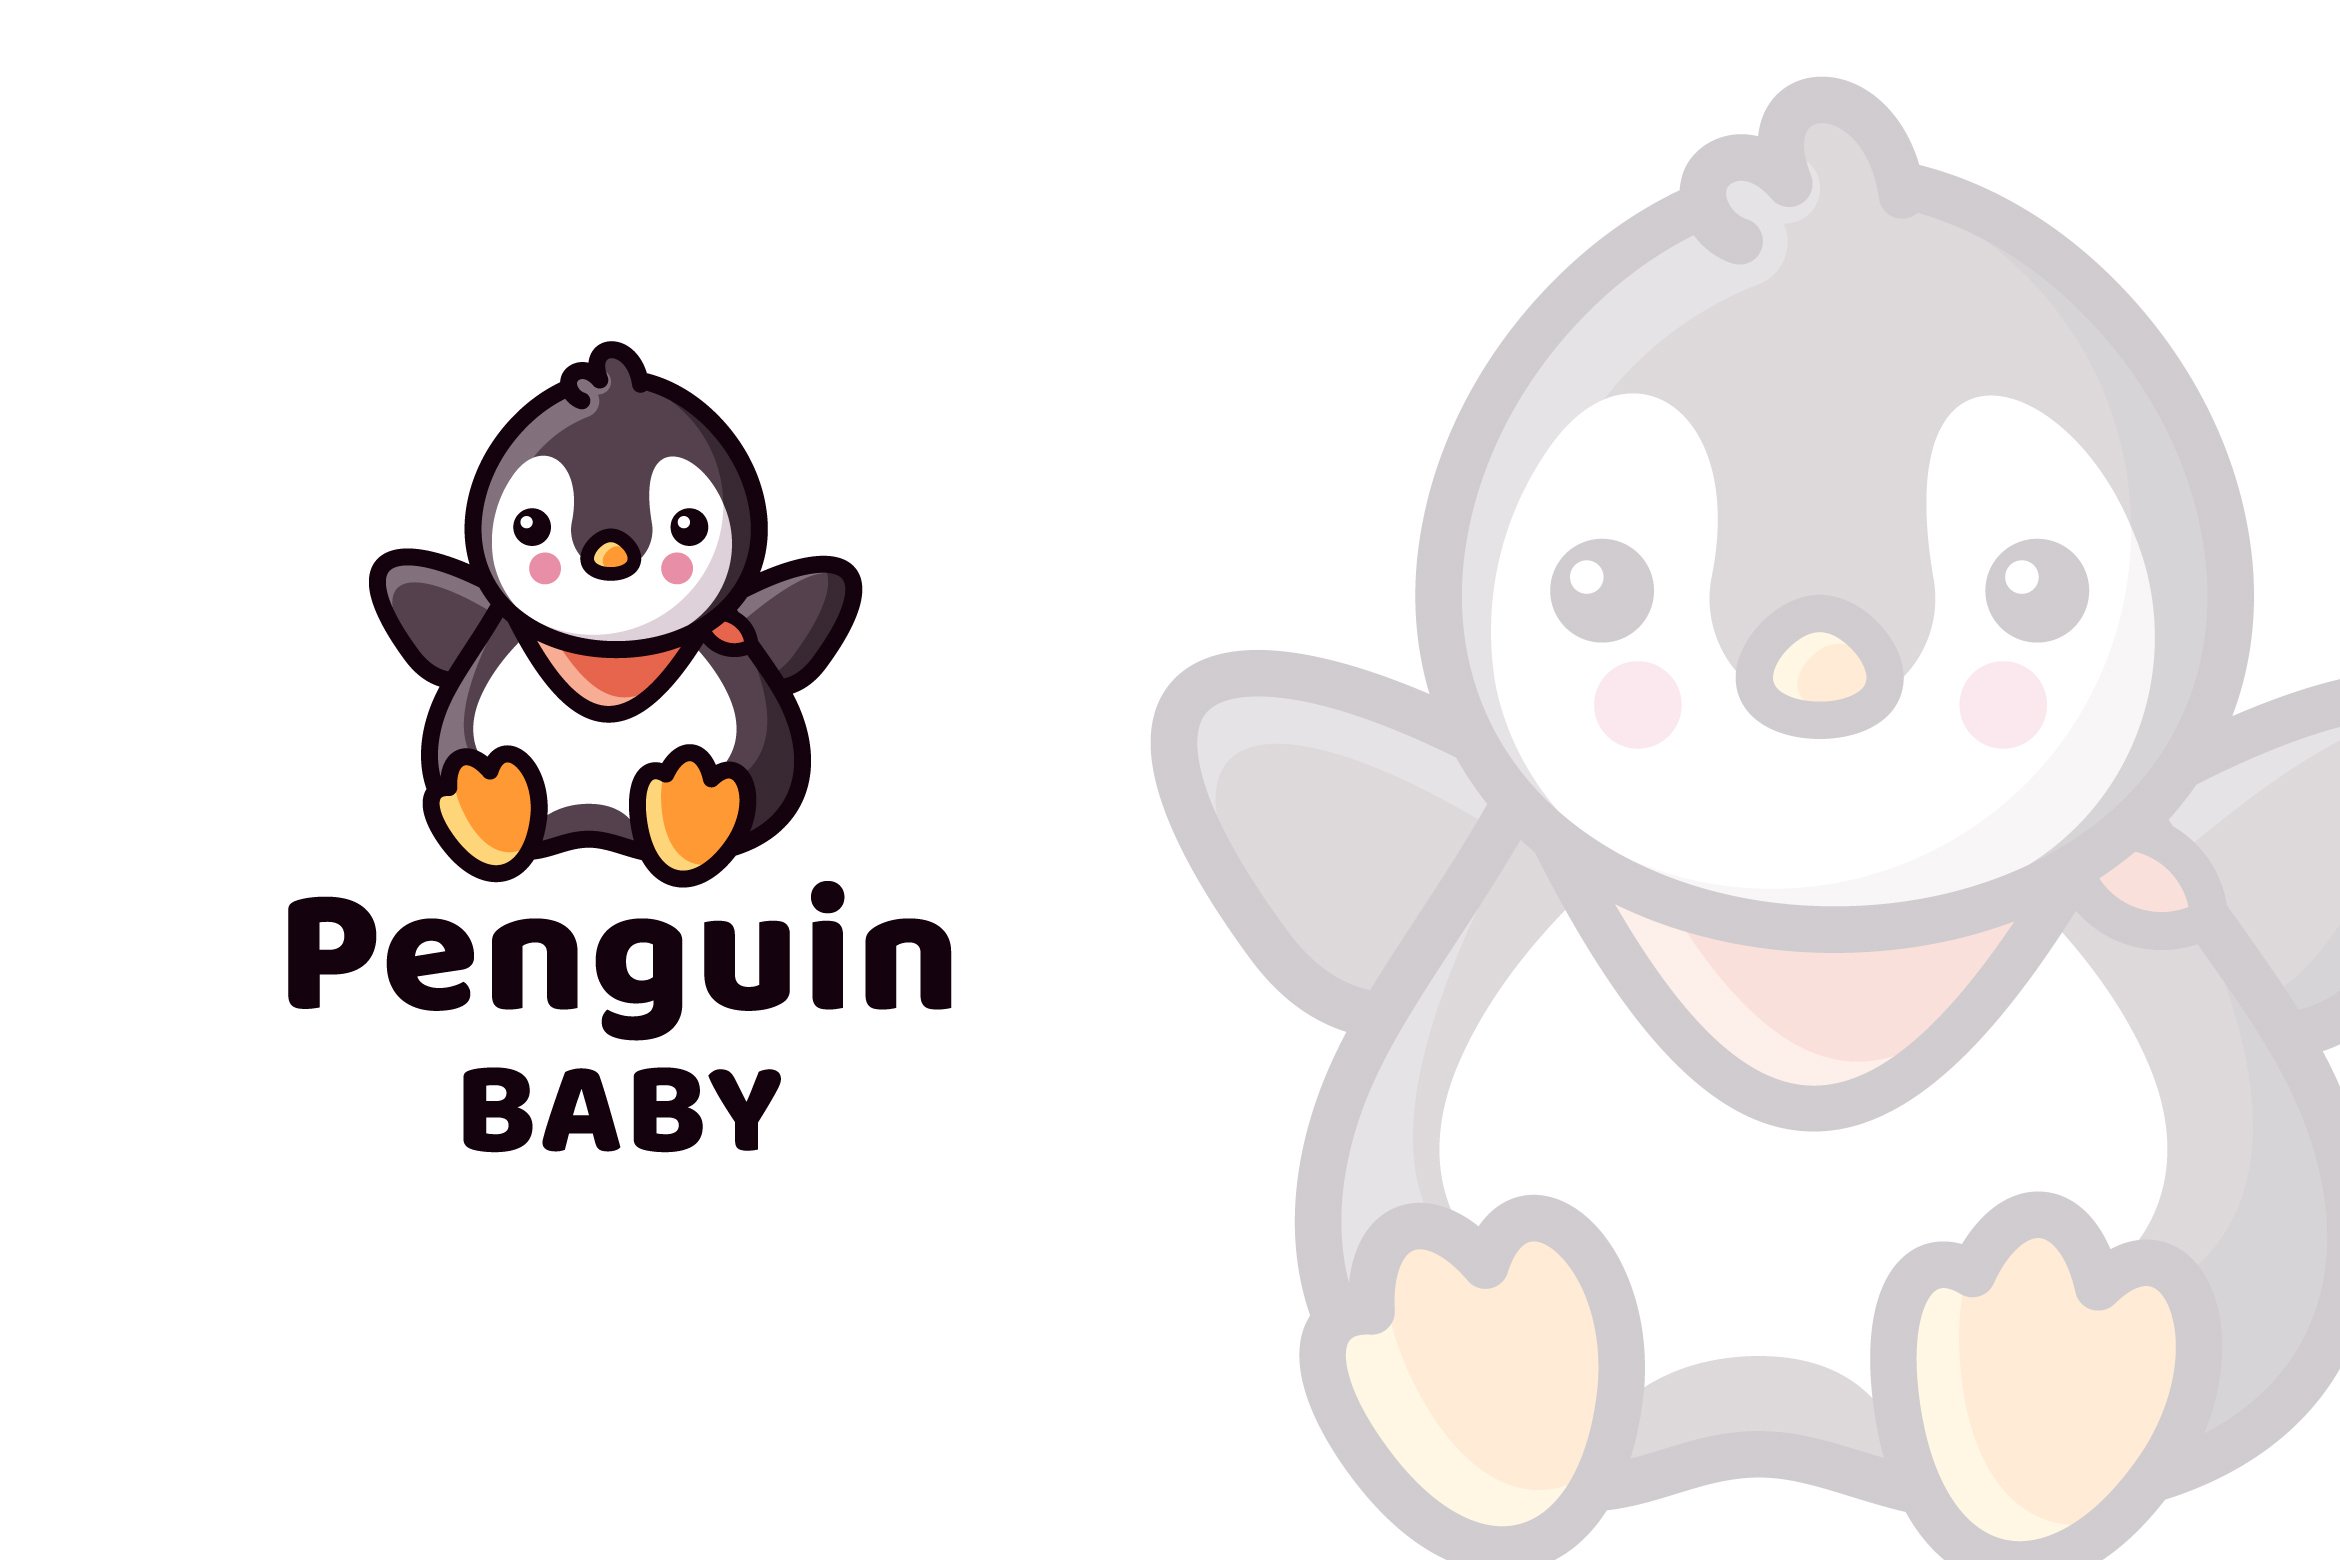 Penguin Baby Cute Logo Template cover image.